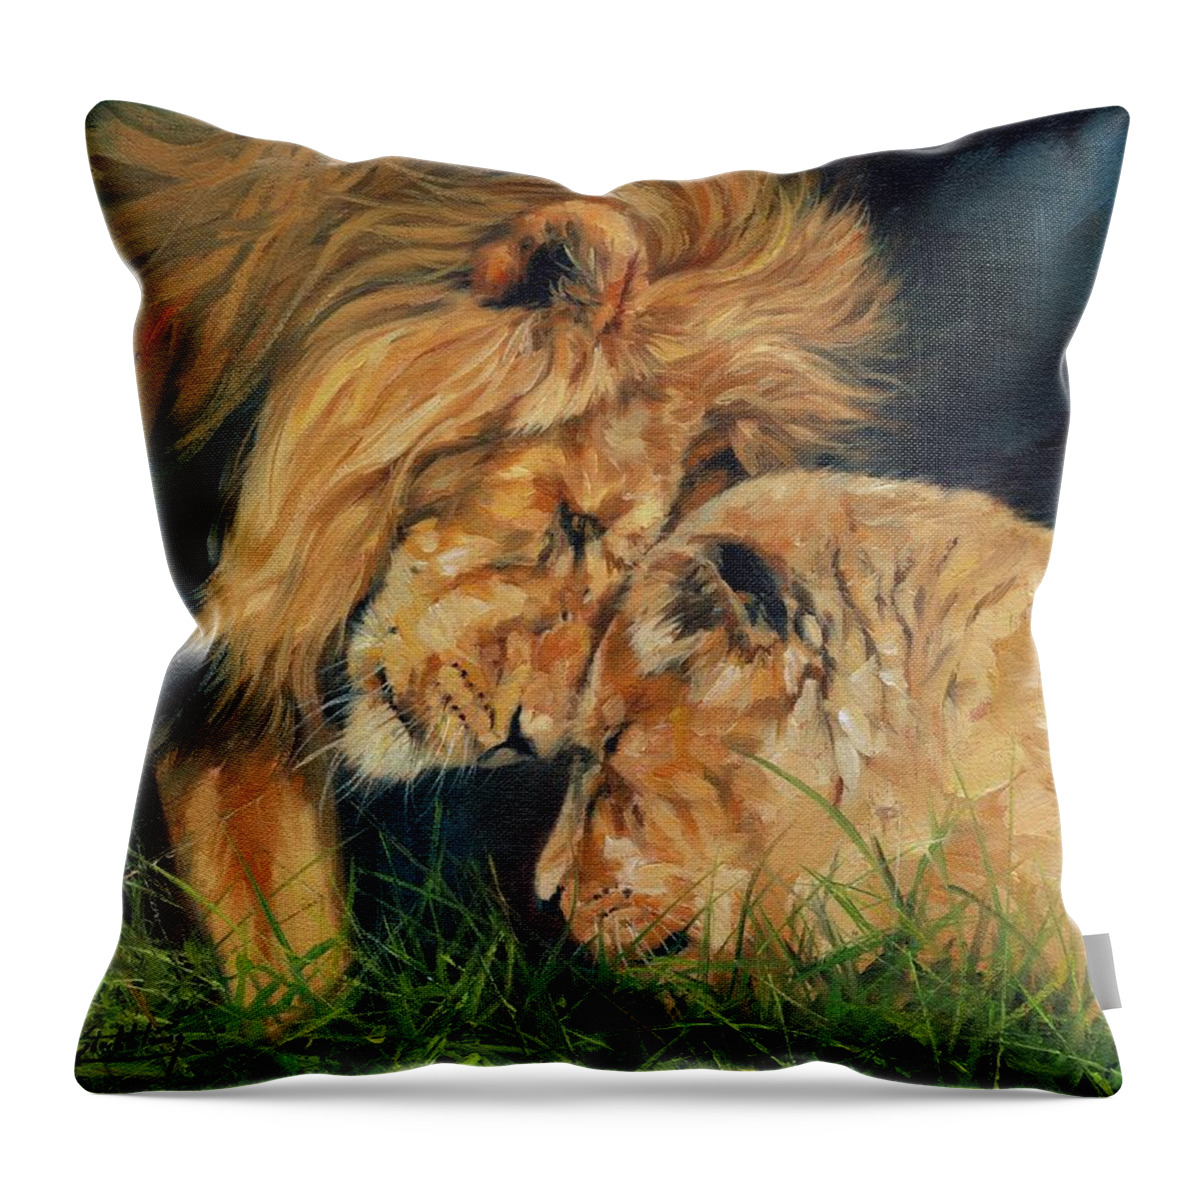 Lion Throw Pillow featuring the painting Lion Love by David Stribbling